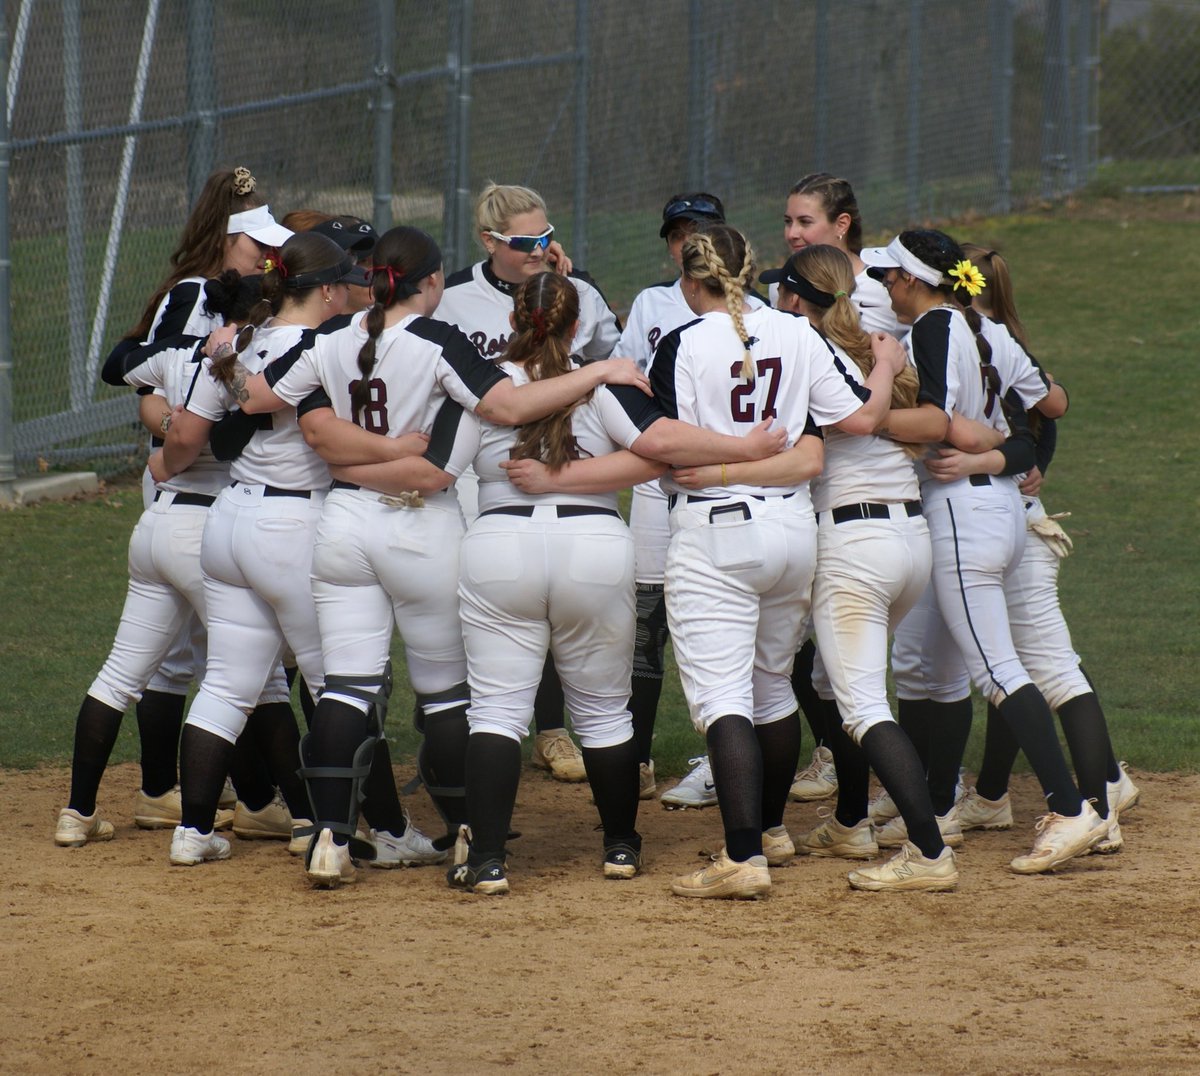 The excitement continues - our Women’s Softball team finishes number two in the CSAC regular season and secures the second seed in the upcoming tournament! This season was filled with historical accomplishments and we are endlessly proud of the team for making their mark